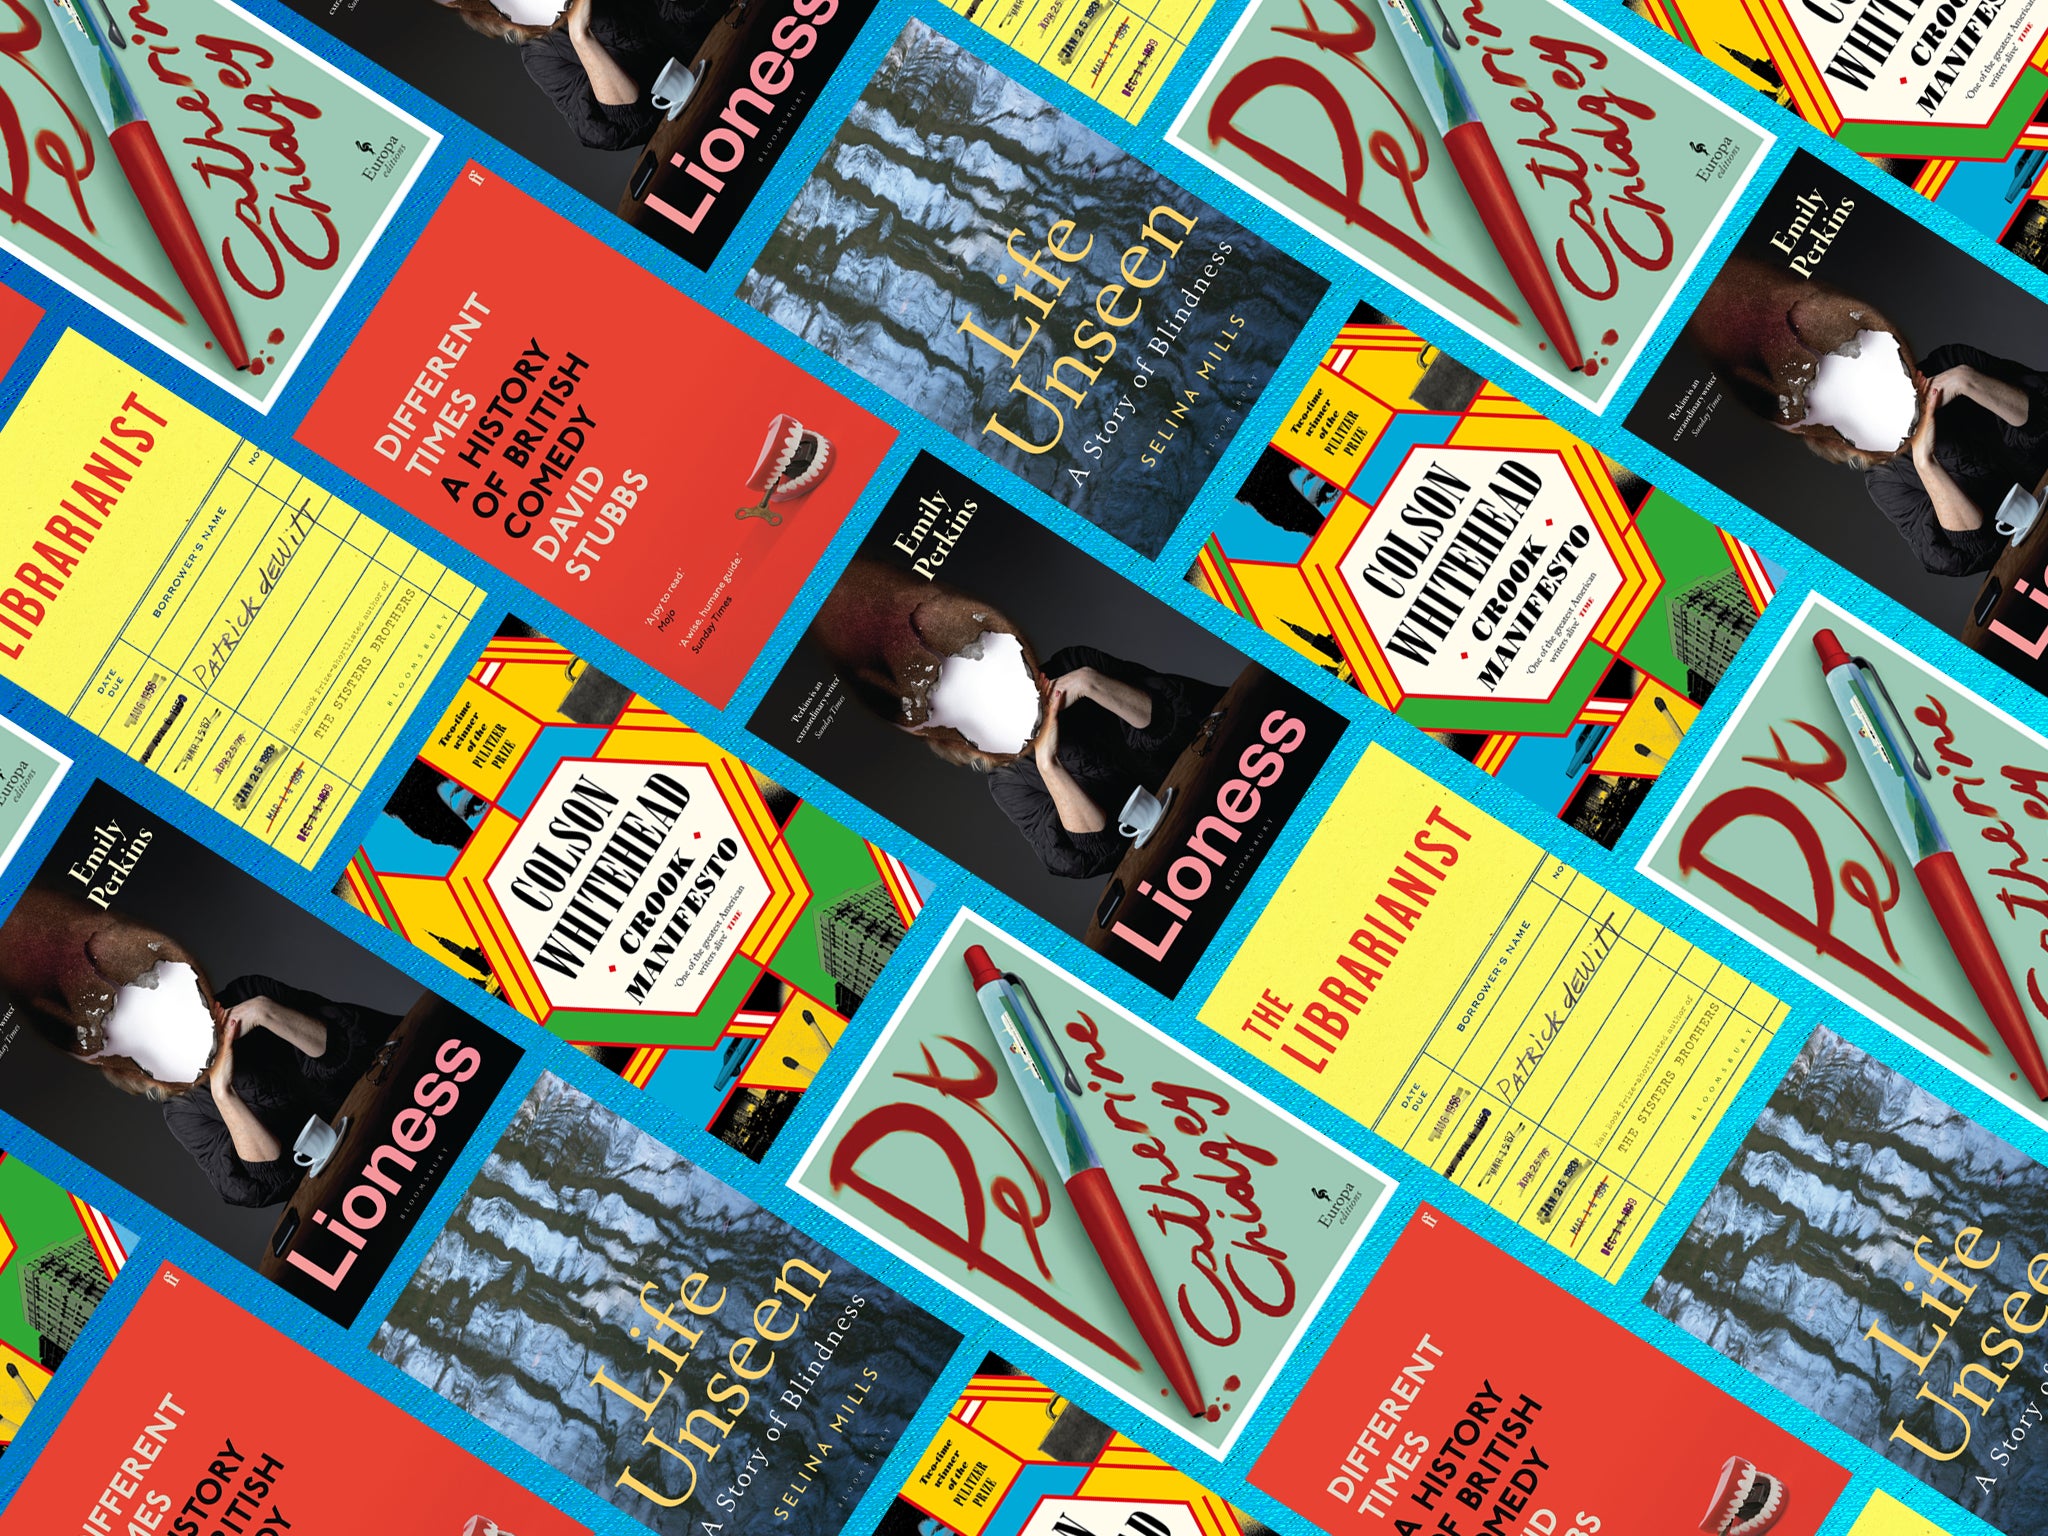 <p>Novels by Patrick deWitt and Catherine Chidgey are also among our picks</p>